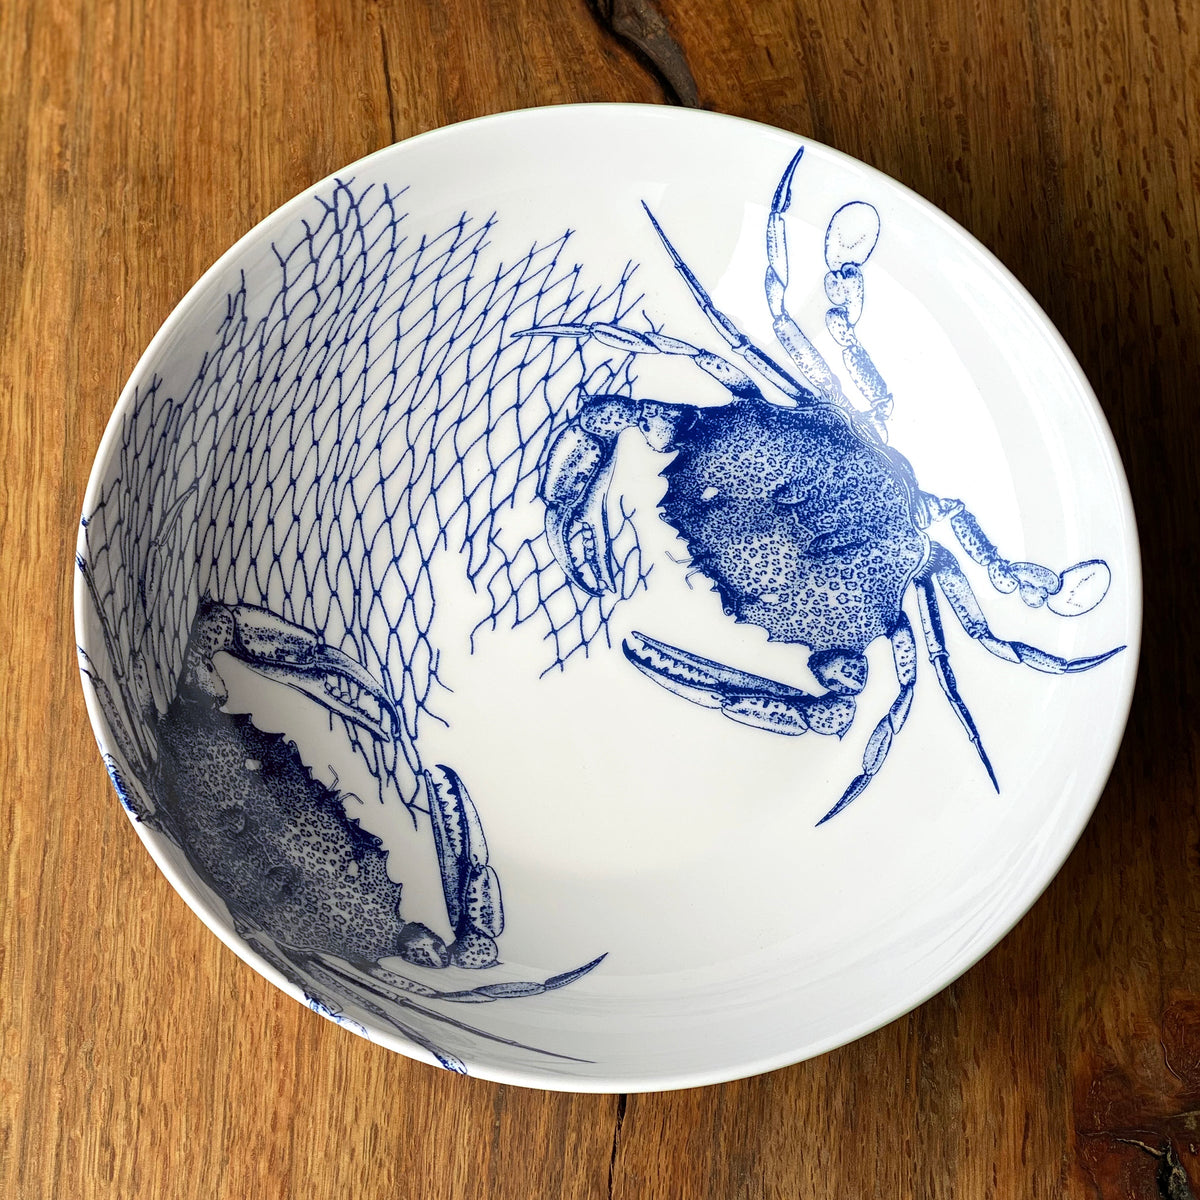 A Crab Wide Serving Bowl with a crab on it by Caskata Artisanal Home.